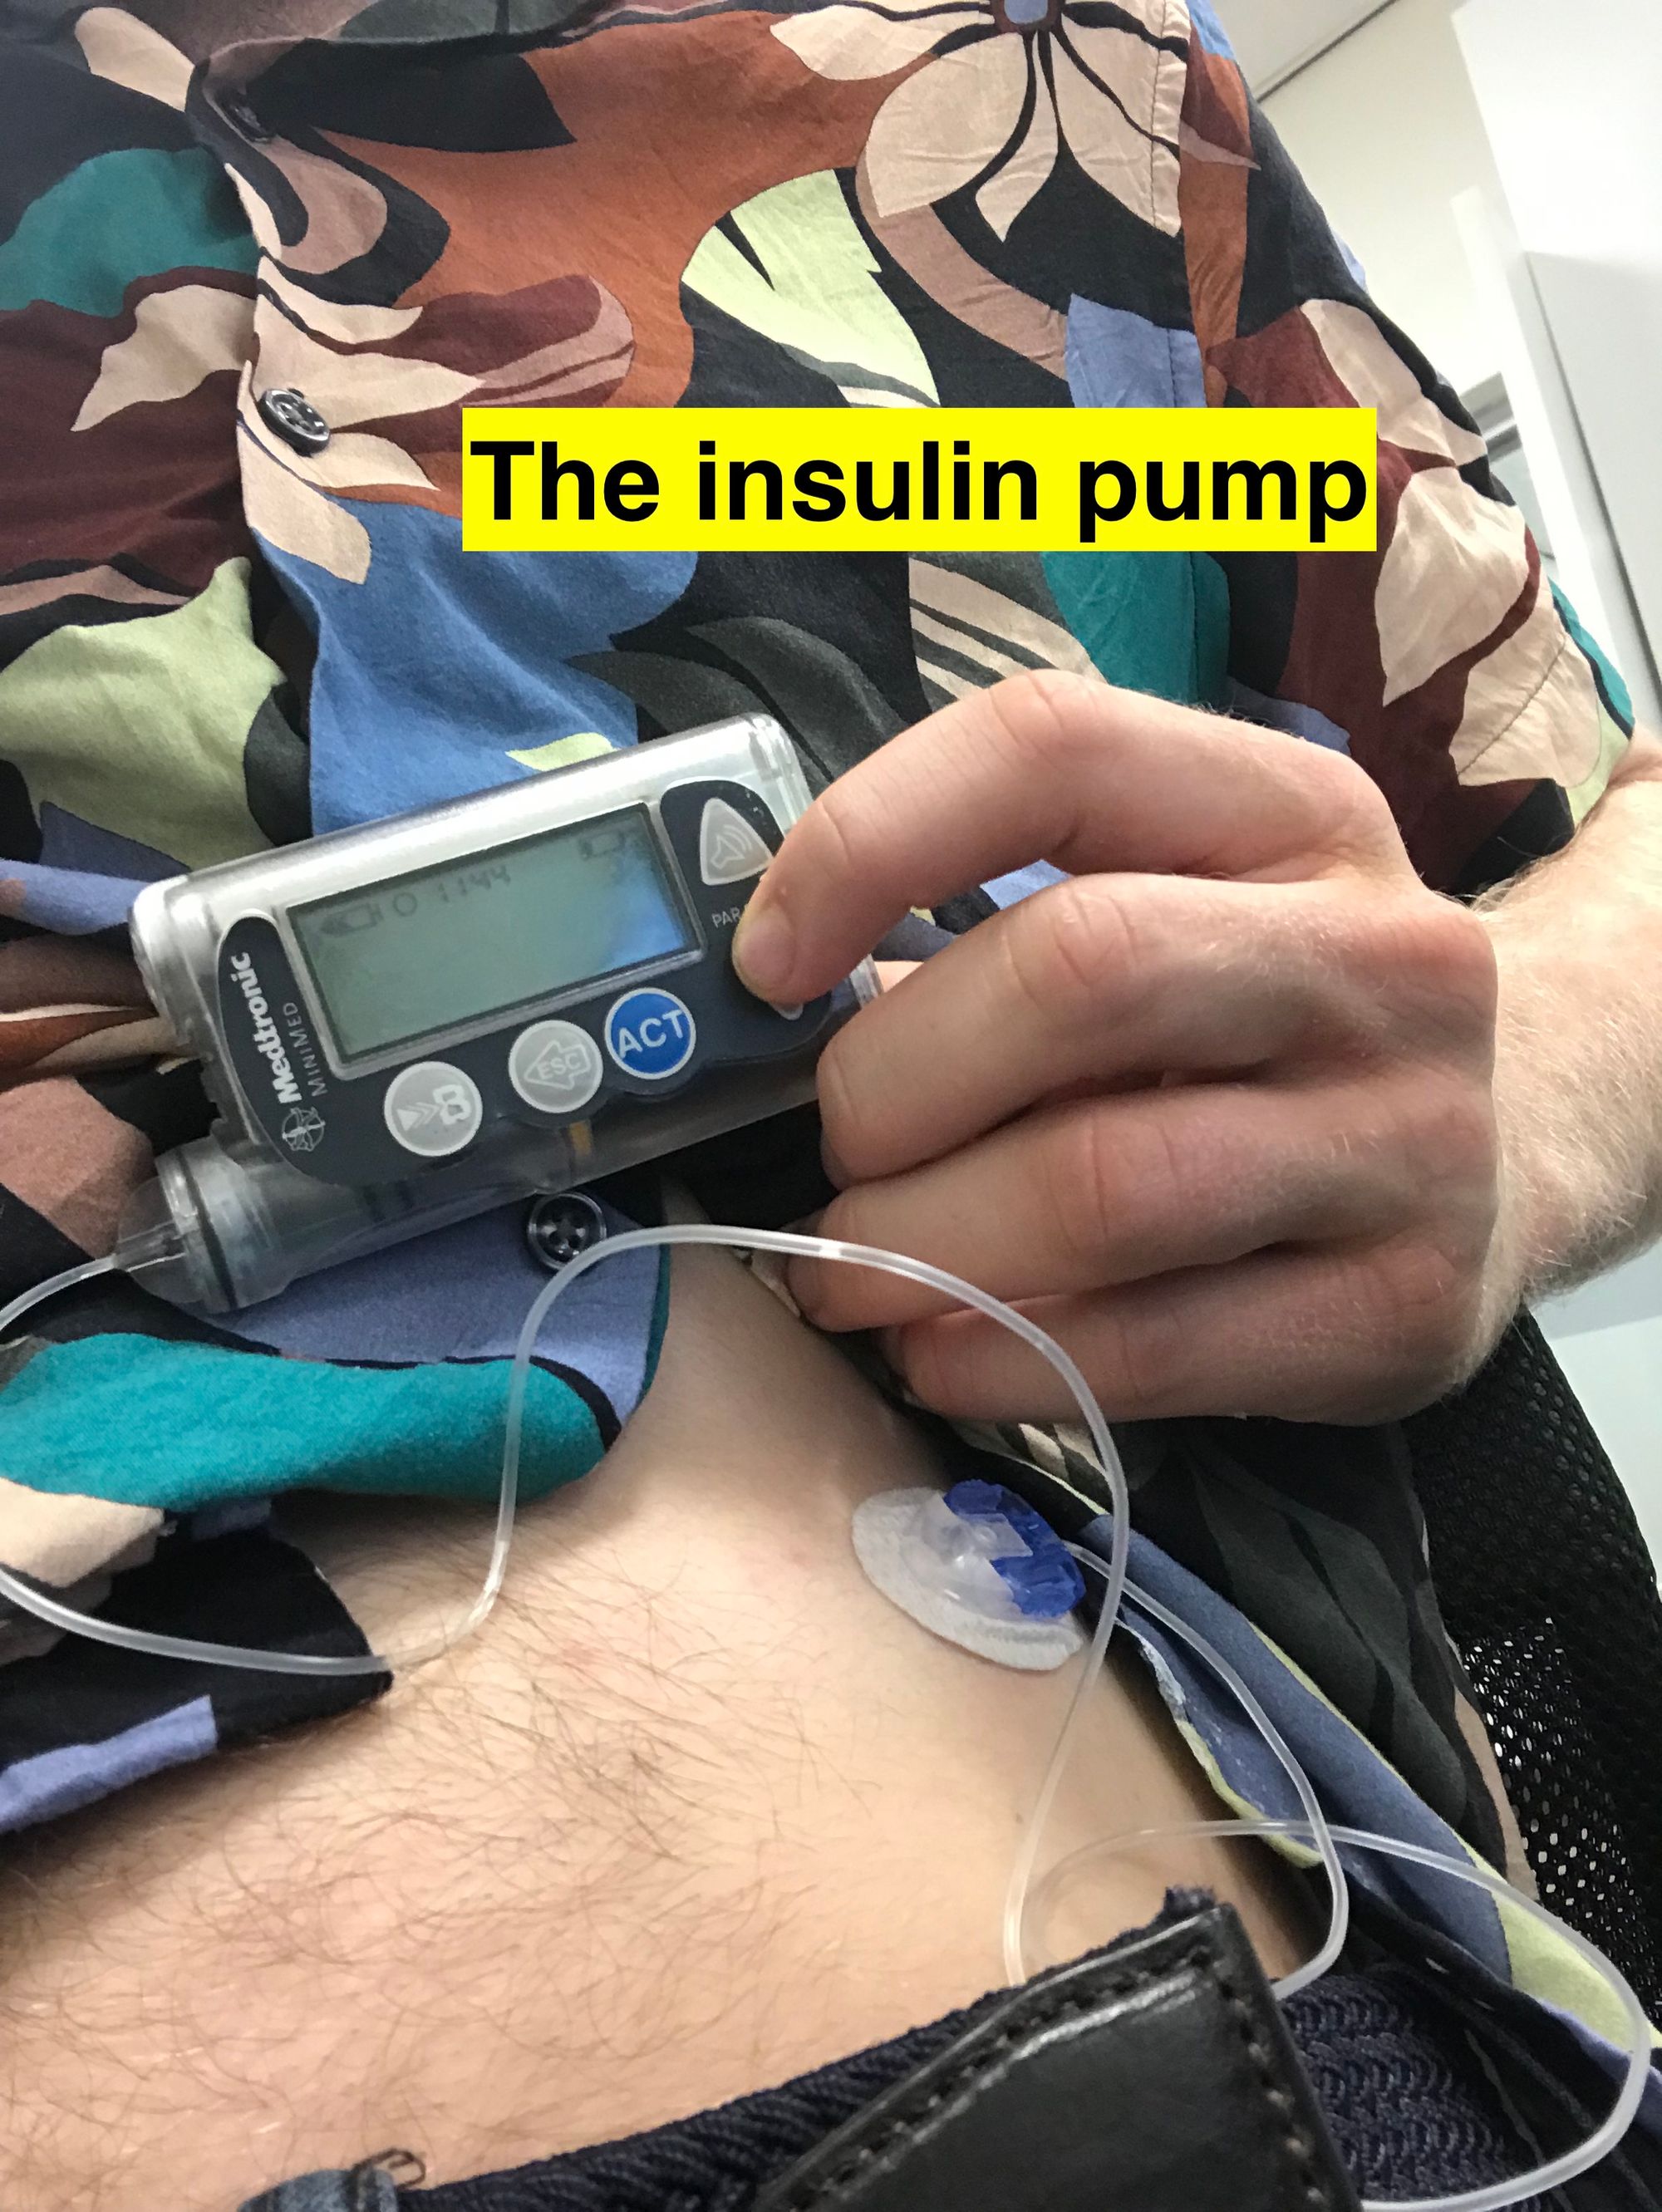 I'm a cyborg now! (On Building My Own Artificial Pancreas)